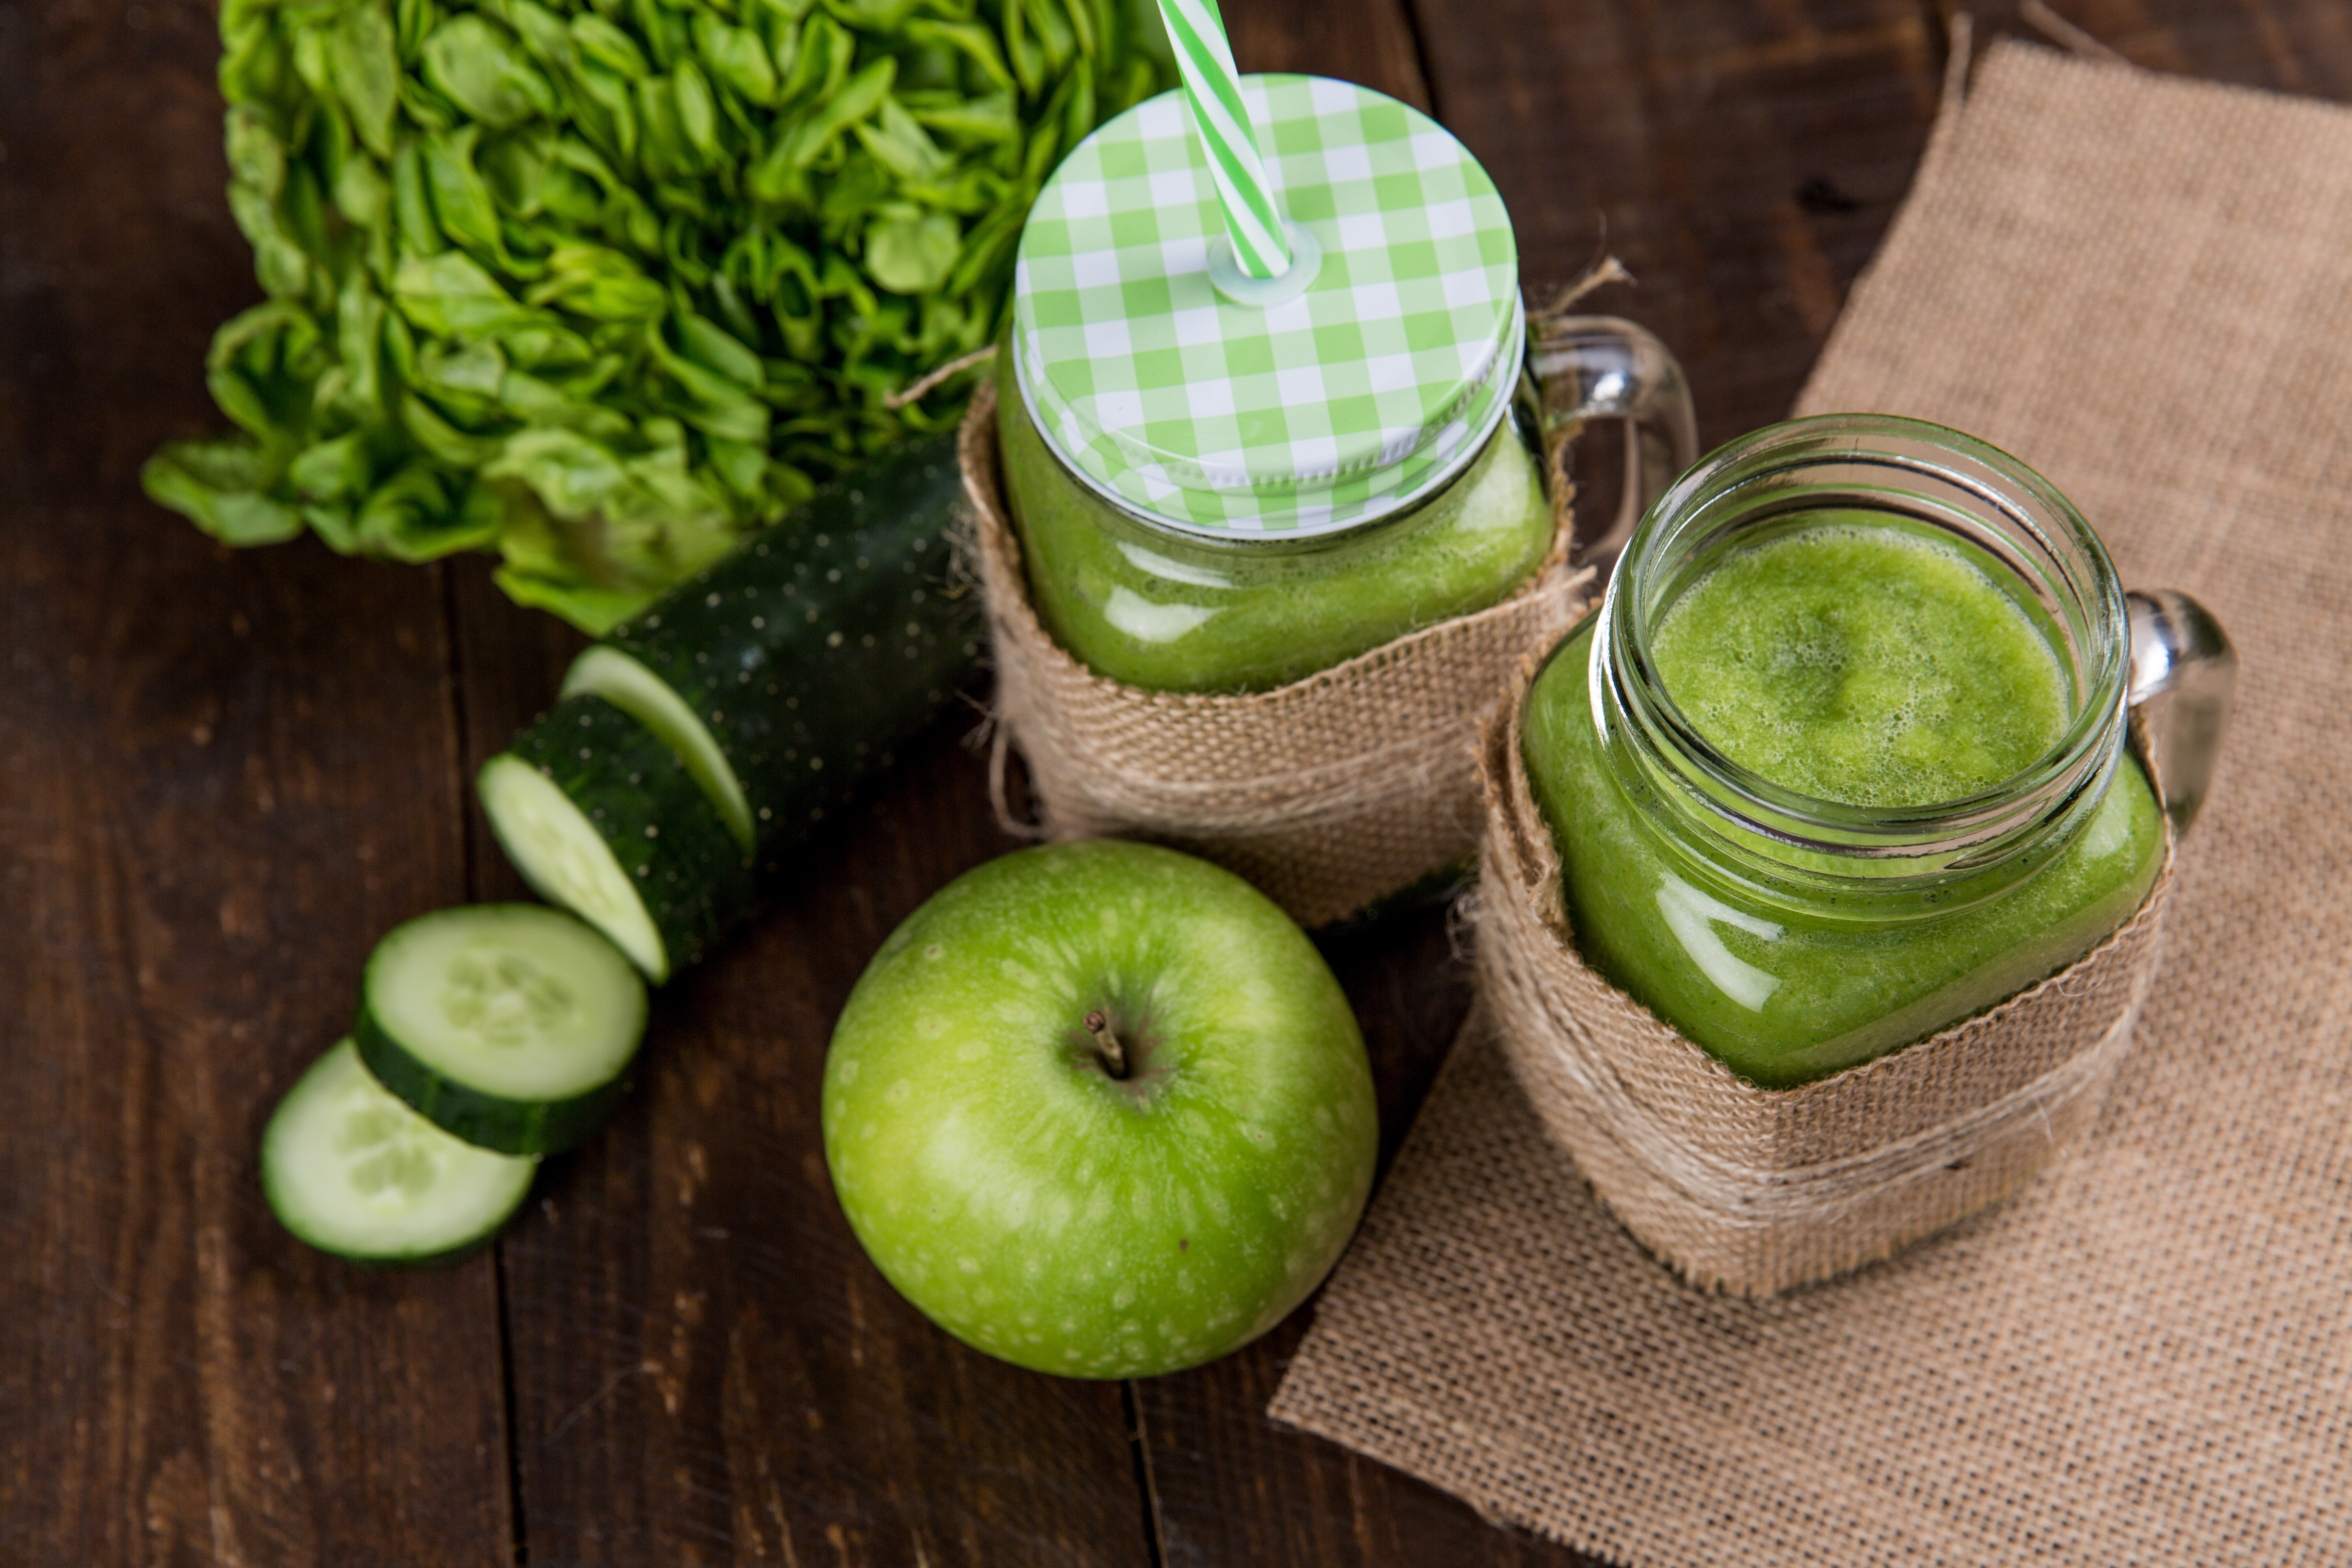 How to Make Your Own Green Smoothie Recipes, That Don’t Taste Disgusting!